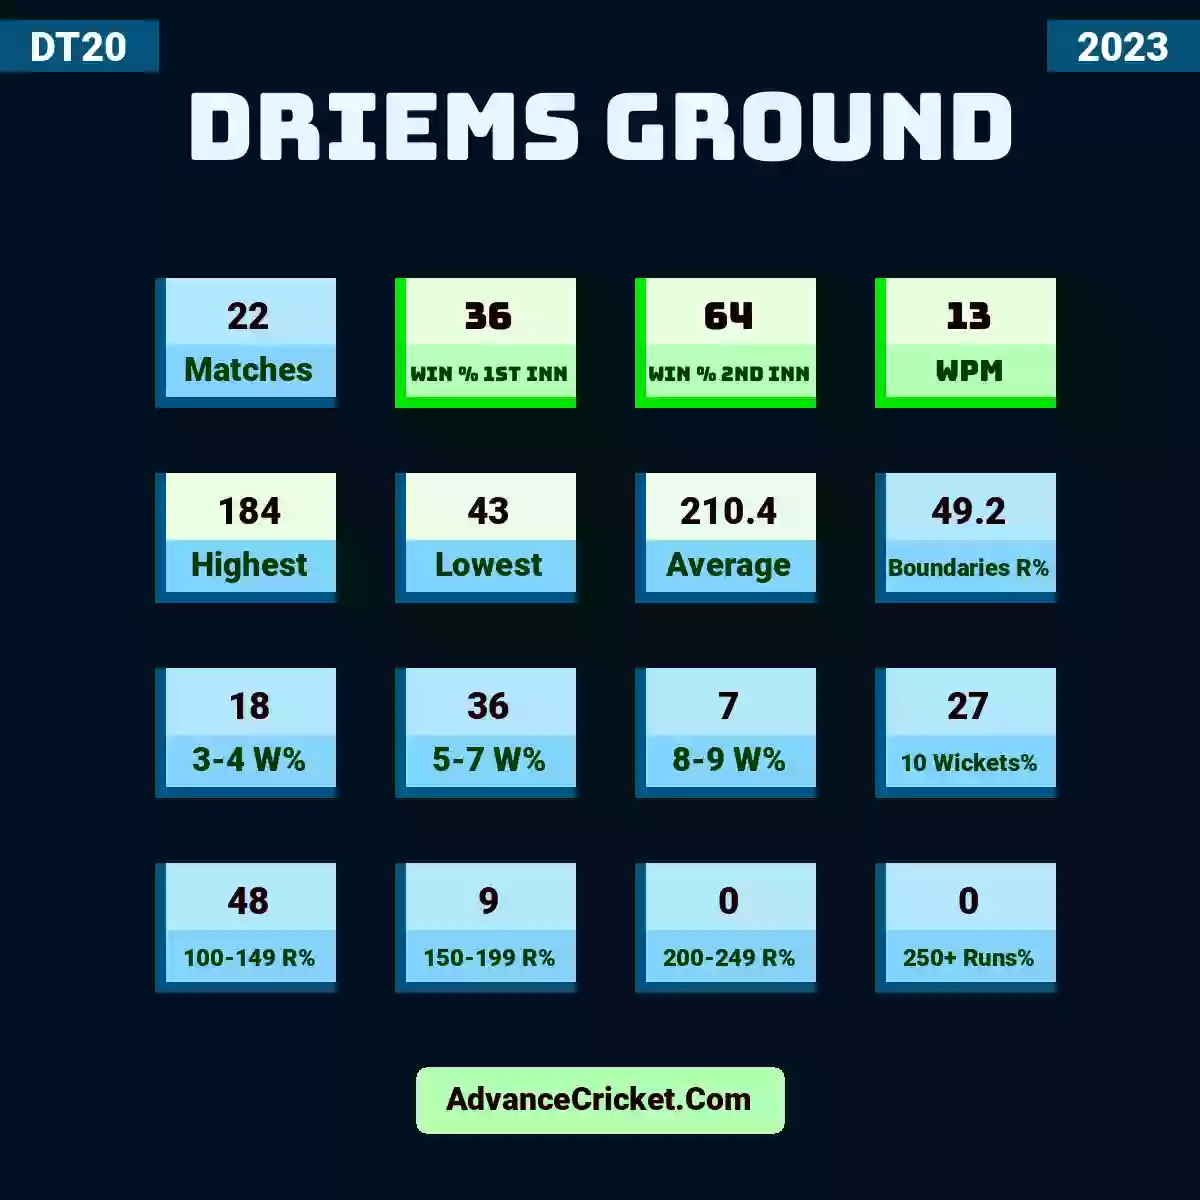 Image showing DRIEMS Ground with Matches: 22, Win % 1st Inn: 36, Win % 2nd Inn: 64, WPM: 13, Highest: 184, Lowest: 43, Average: 210.4, Boundaries R%: 49.2, 3-4 W%: 18, 5-7 W%: 36, 8-9 W%: 7, 10 Wickets%: 27, 100-149 R%: 48, 150-199 R%: 9, 200-249 R%: 0, 250+ Runs%: 0.